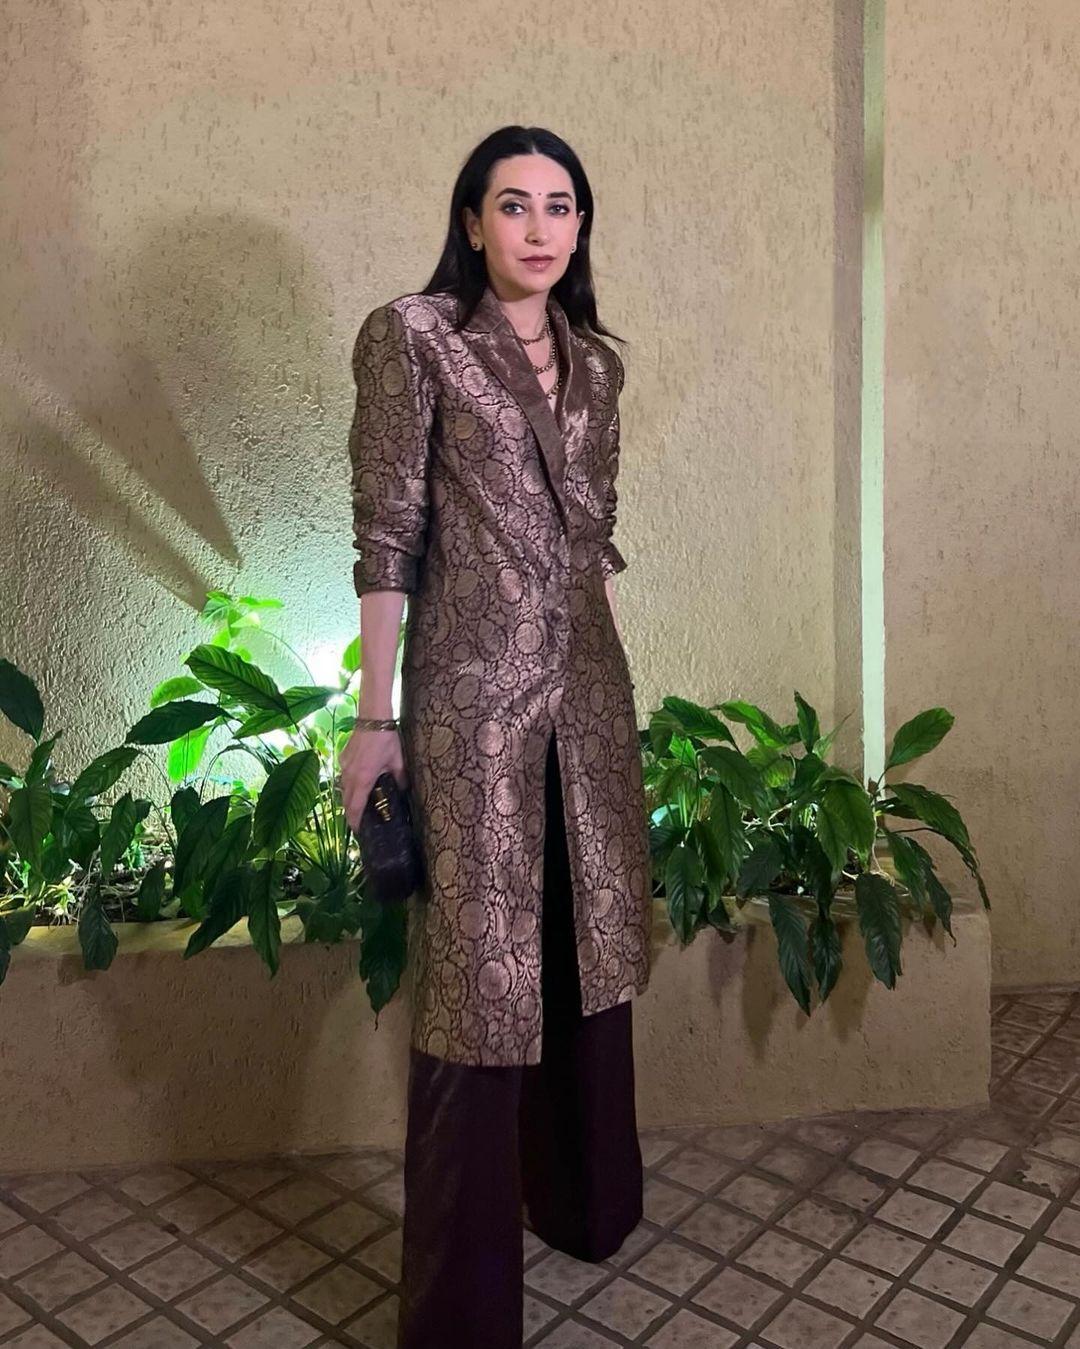 Karisma Kapoor looked stunning at an event in a brown suit-style kurta with a collared neckline. The outfit was both sophisticated and chic, with intricate details on the collar adding structure to the ensemble